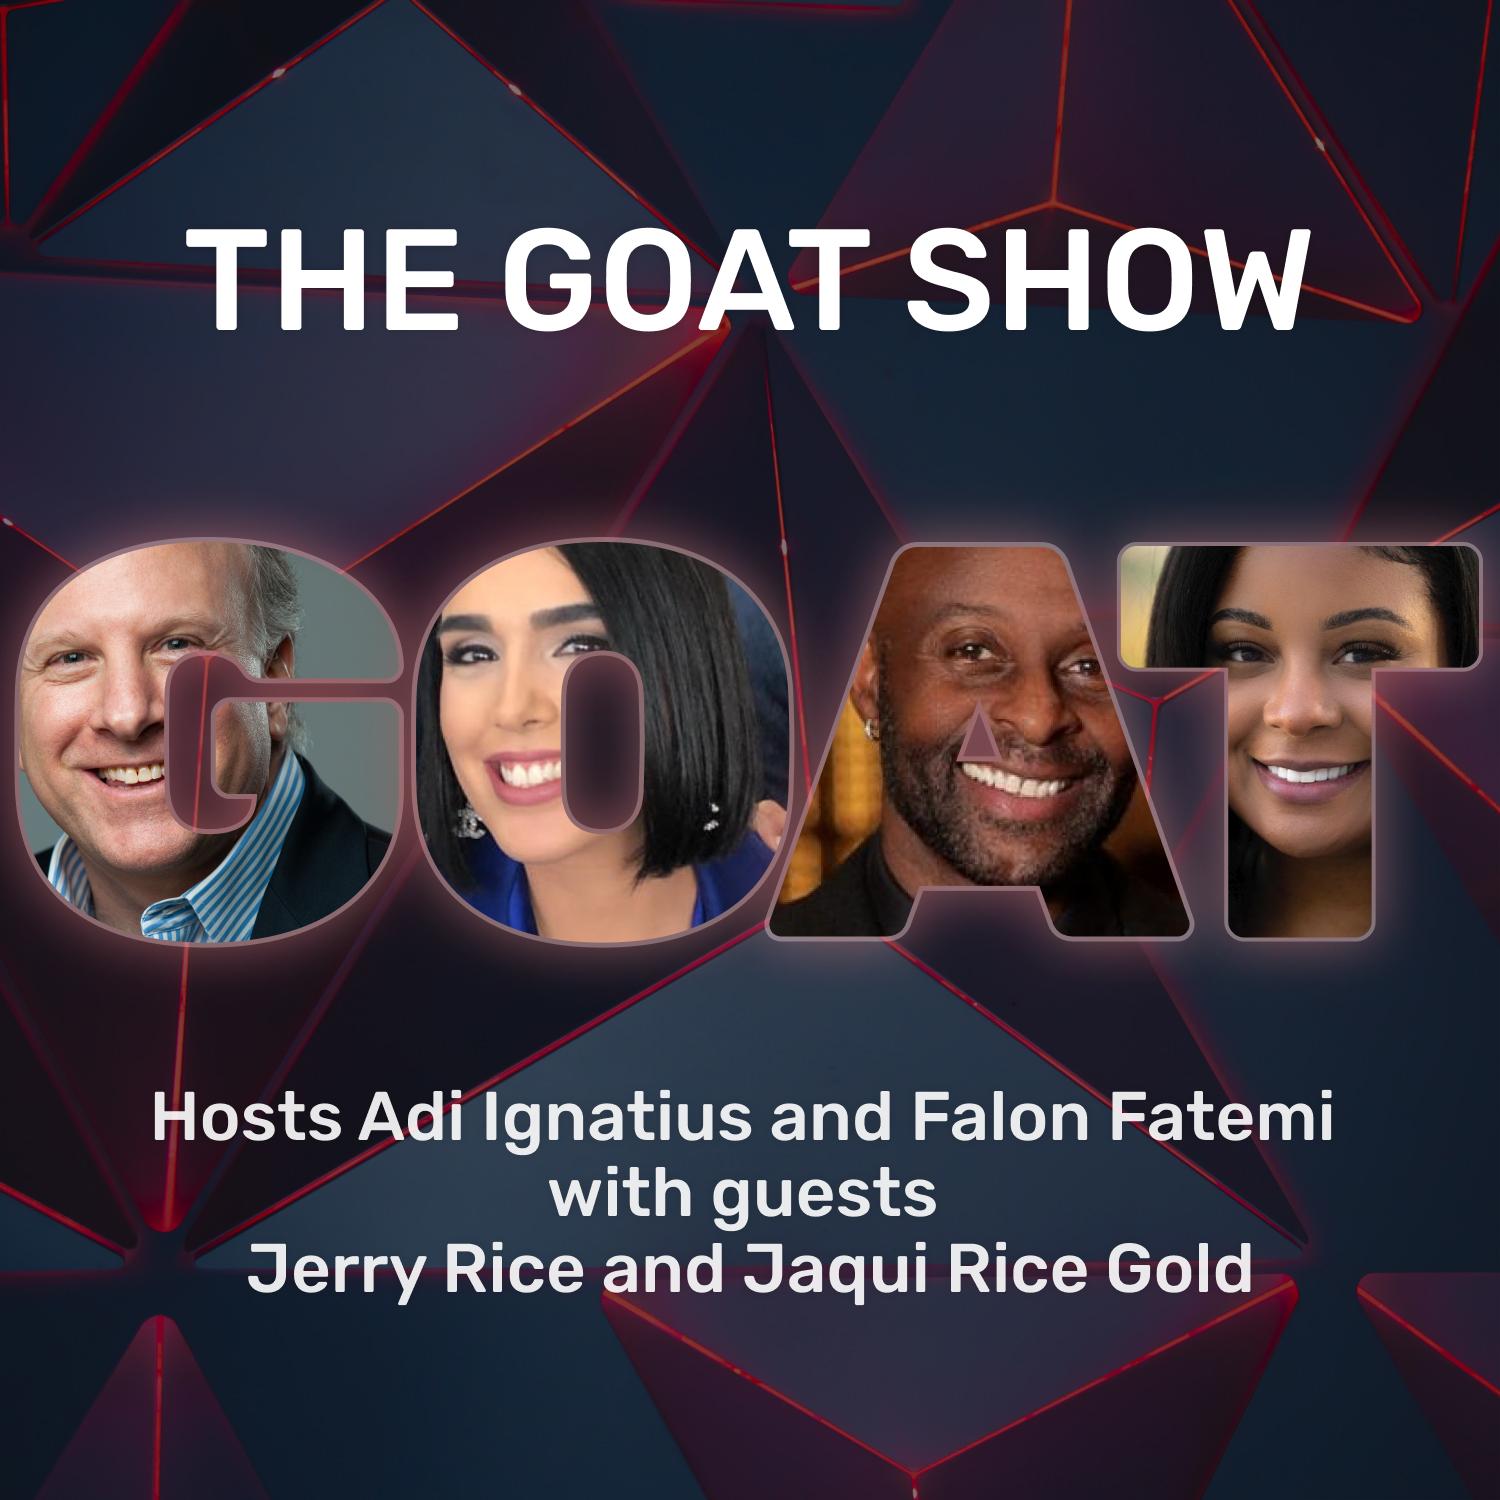 The GOAT Show Premiere w/Jerry Rice and Jaqui Rice